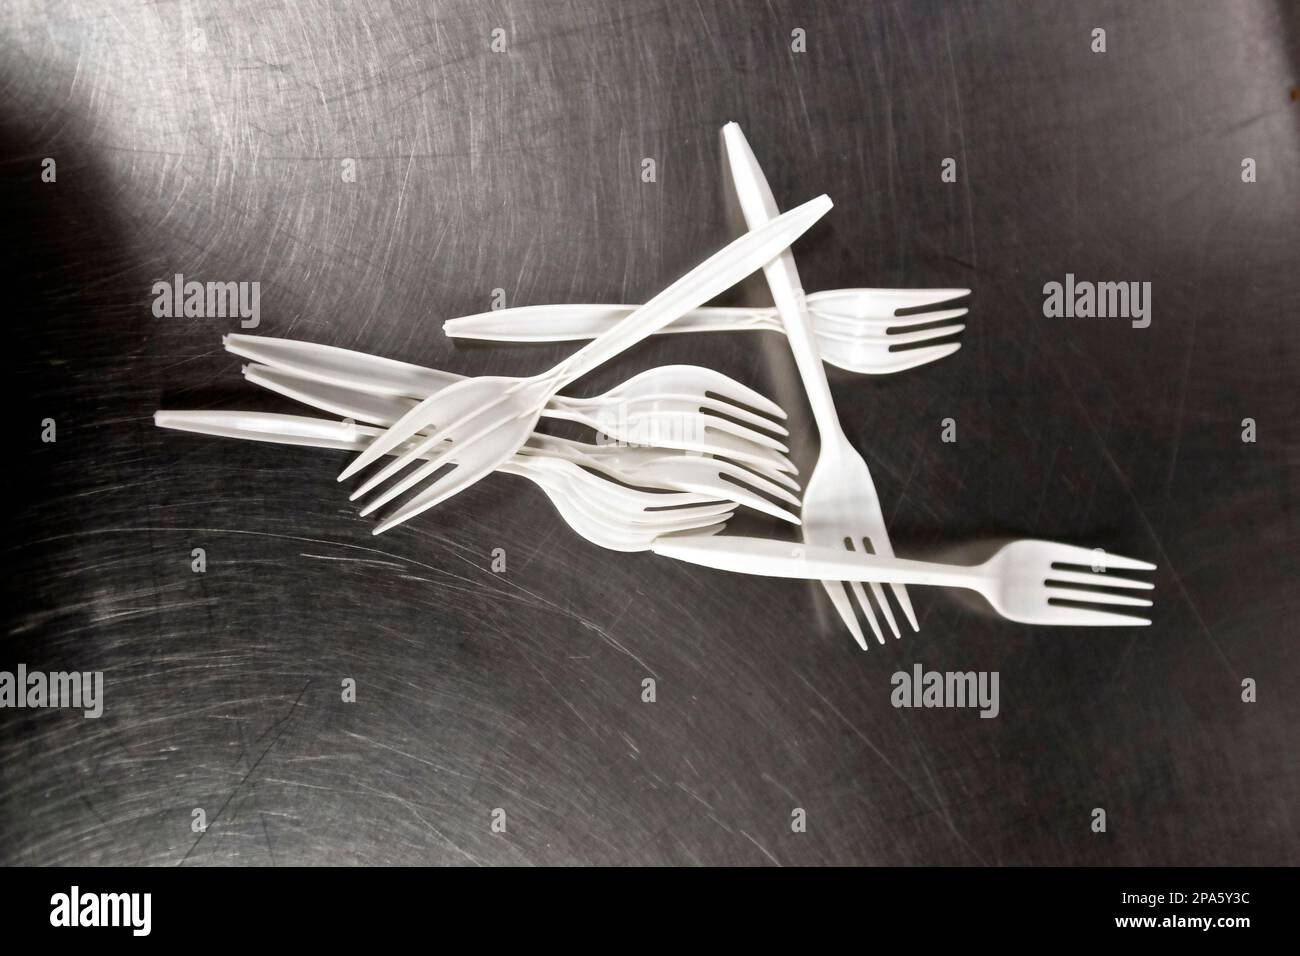 pattern of plastic forks on a scratched steel background Stock Photo